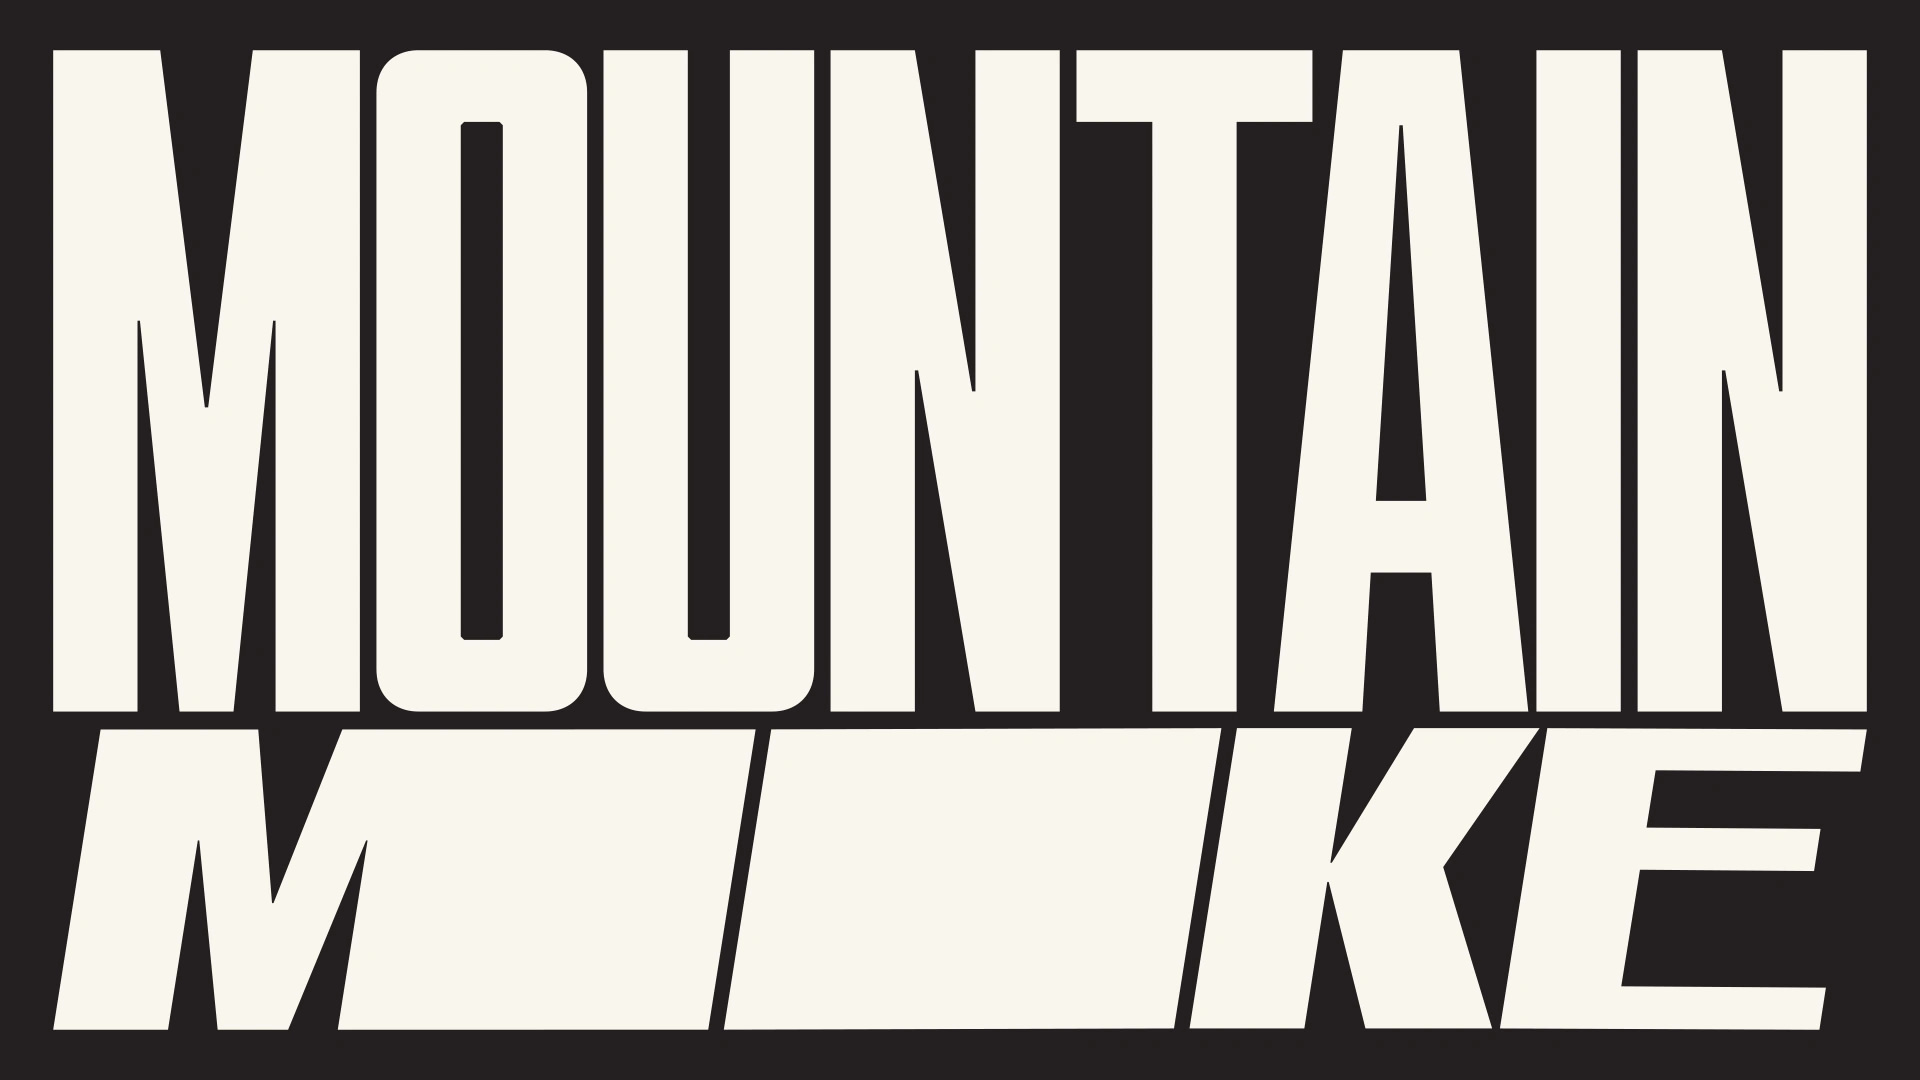 Typography composition filling the entire screen saying "Mountain Mike".